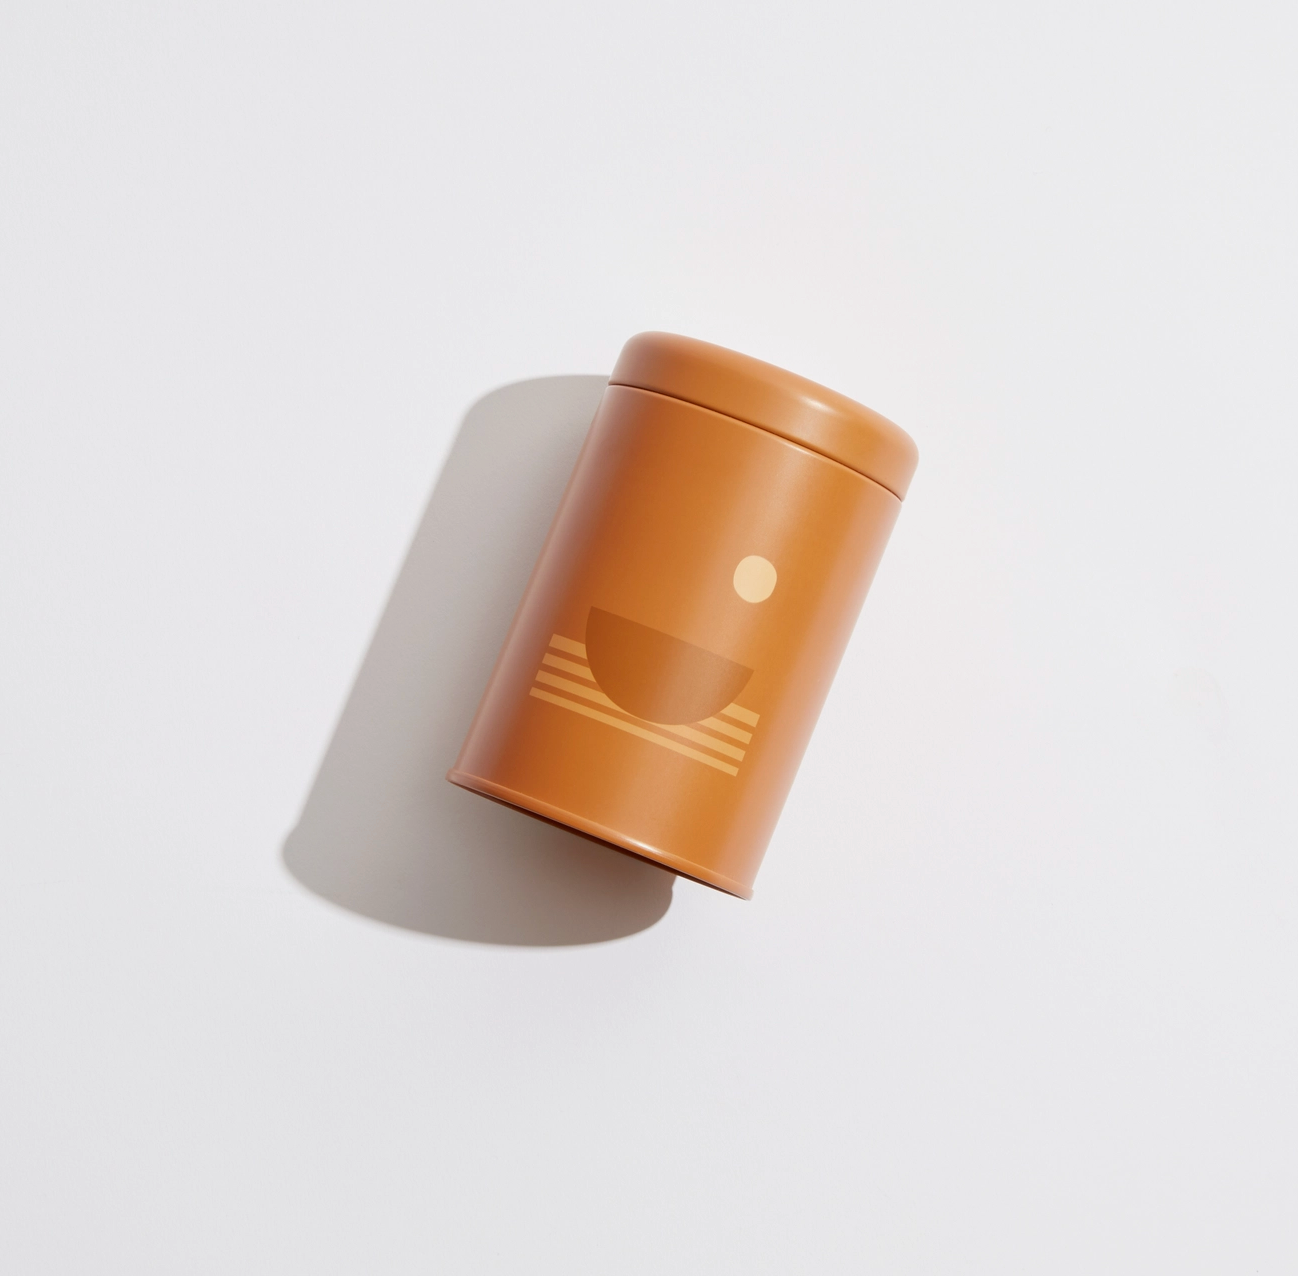 Swell - 10 oz Sunset Soy Candle